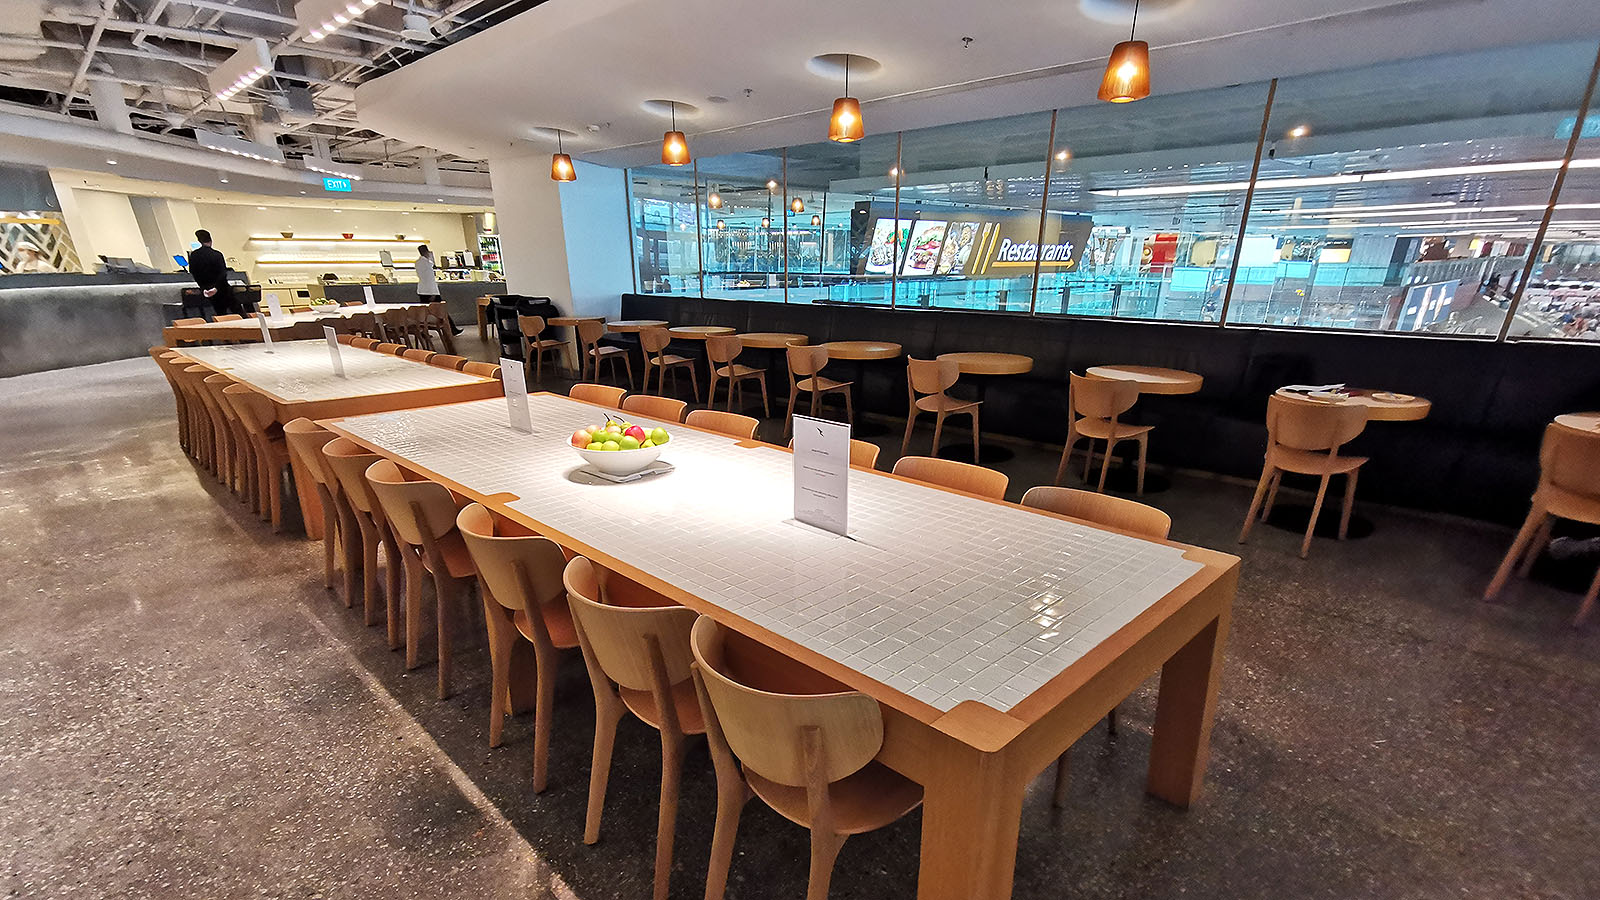 Dining tables at the Qantas International Business Lounge in Singapore